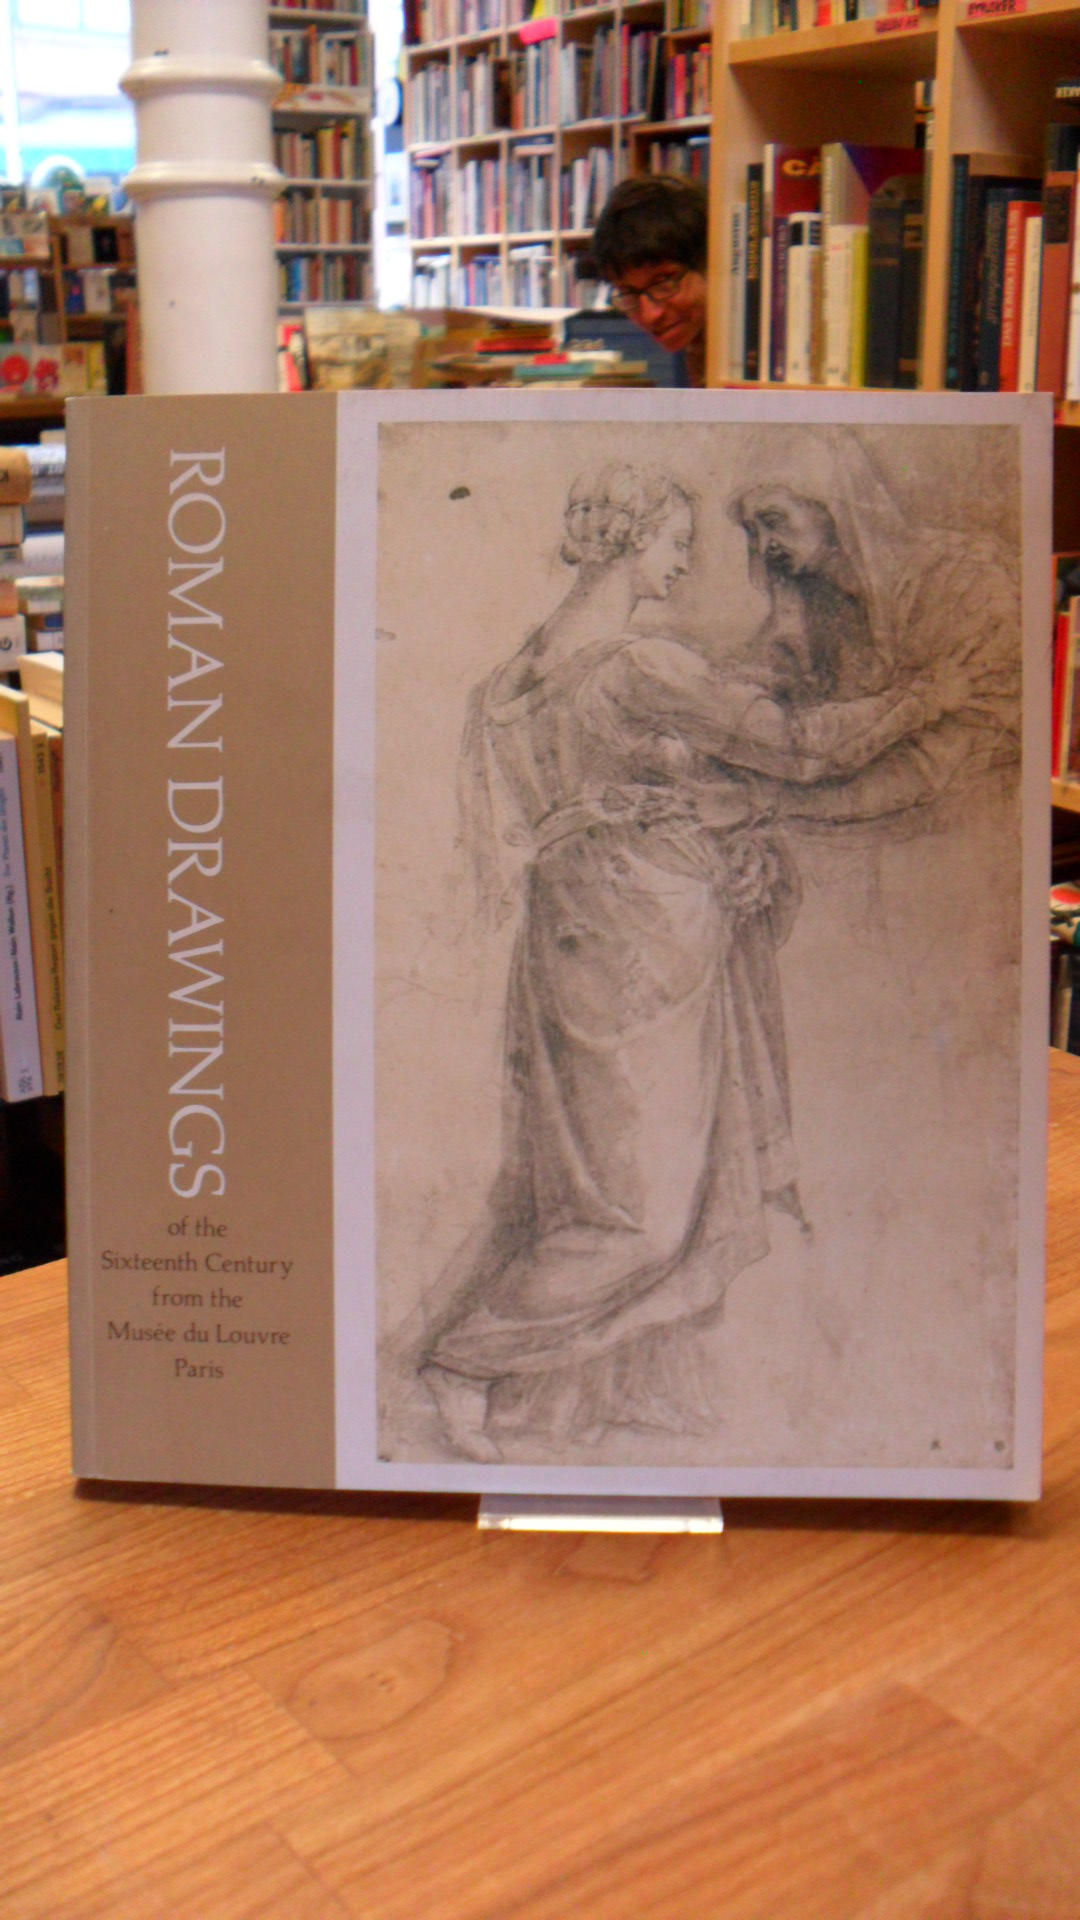 Roman drawings of the sixteenth century from the Musée du Louvre, Paris,